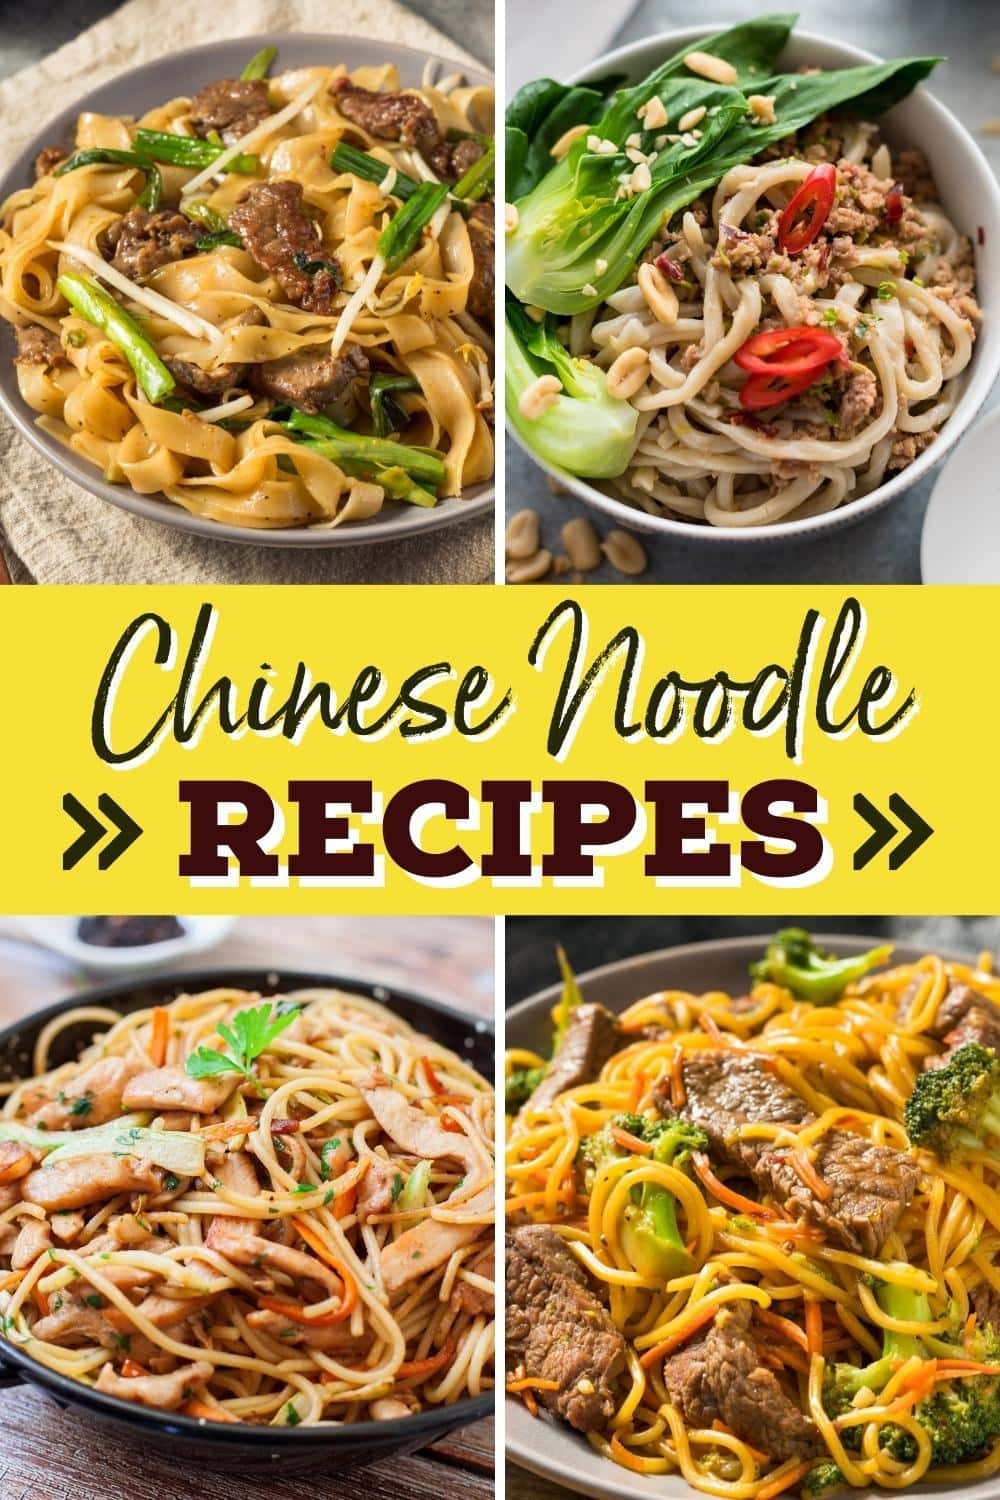 20 Easy Chinese Noodle Recipes - Insanely Good